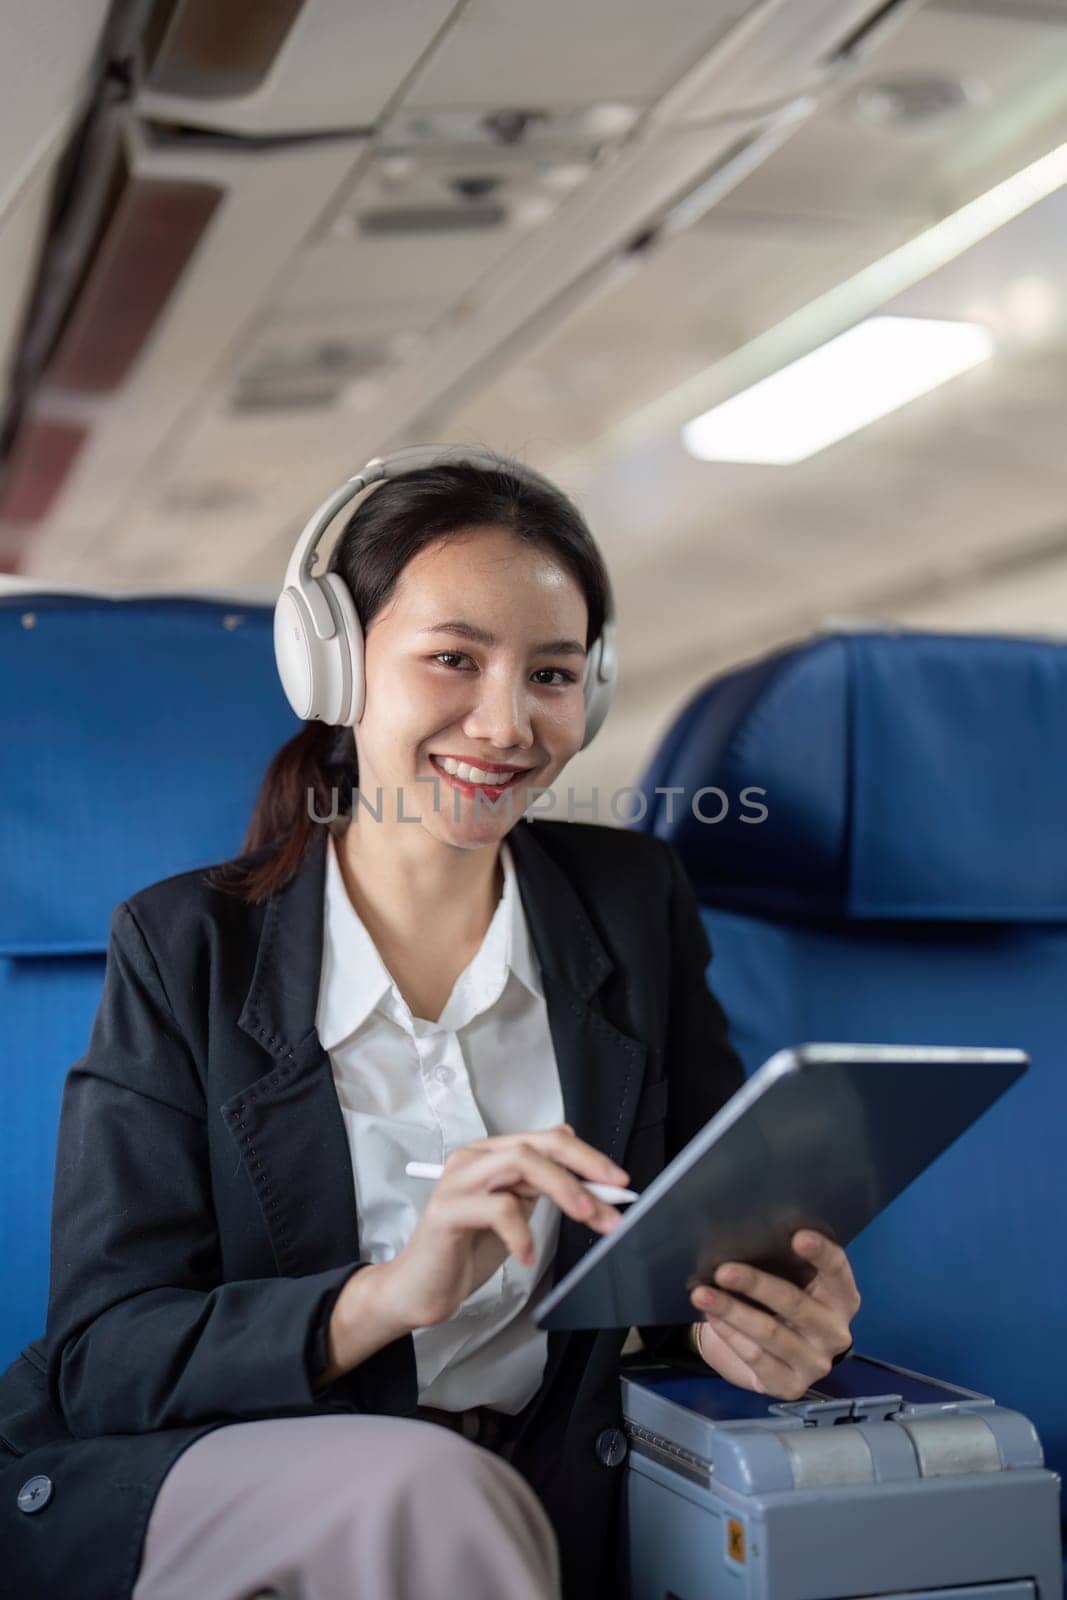 Asian young woman wearing headphone listen to music at first class on airplane during flight, Traveling and Business concept.